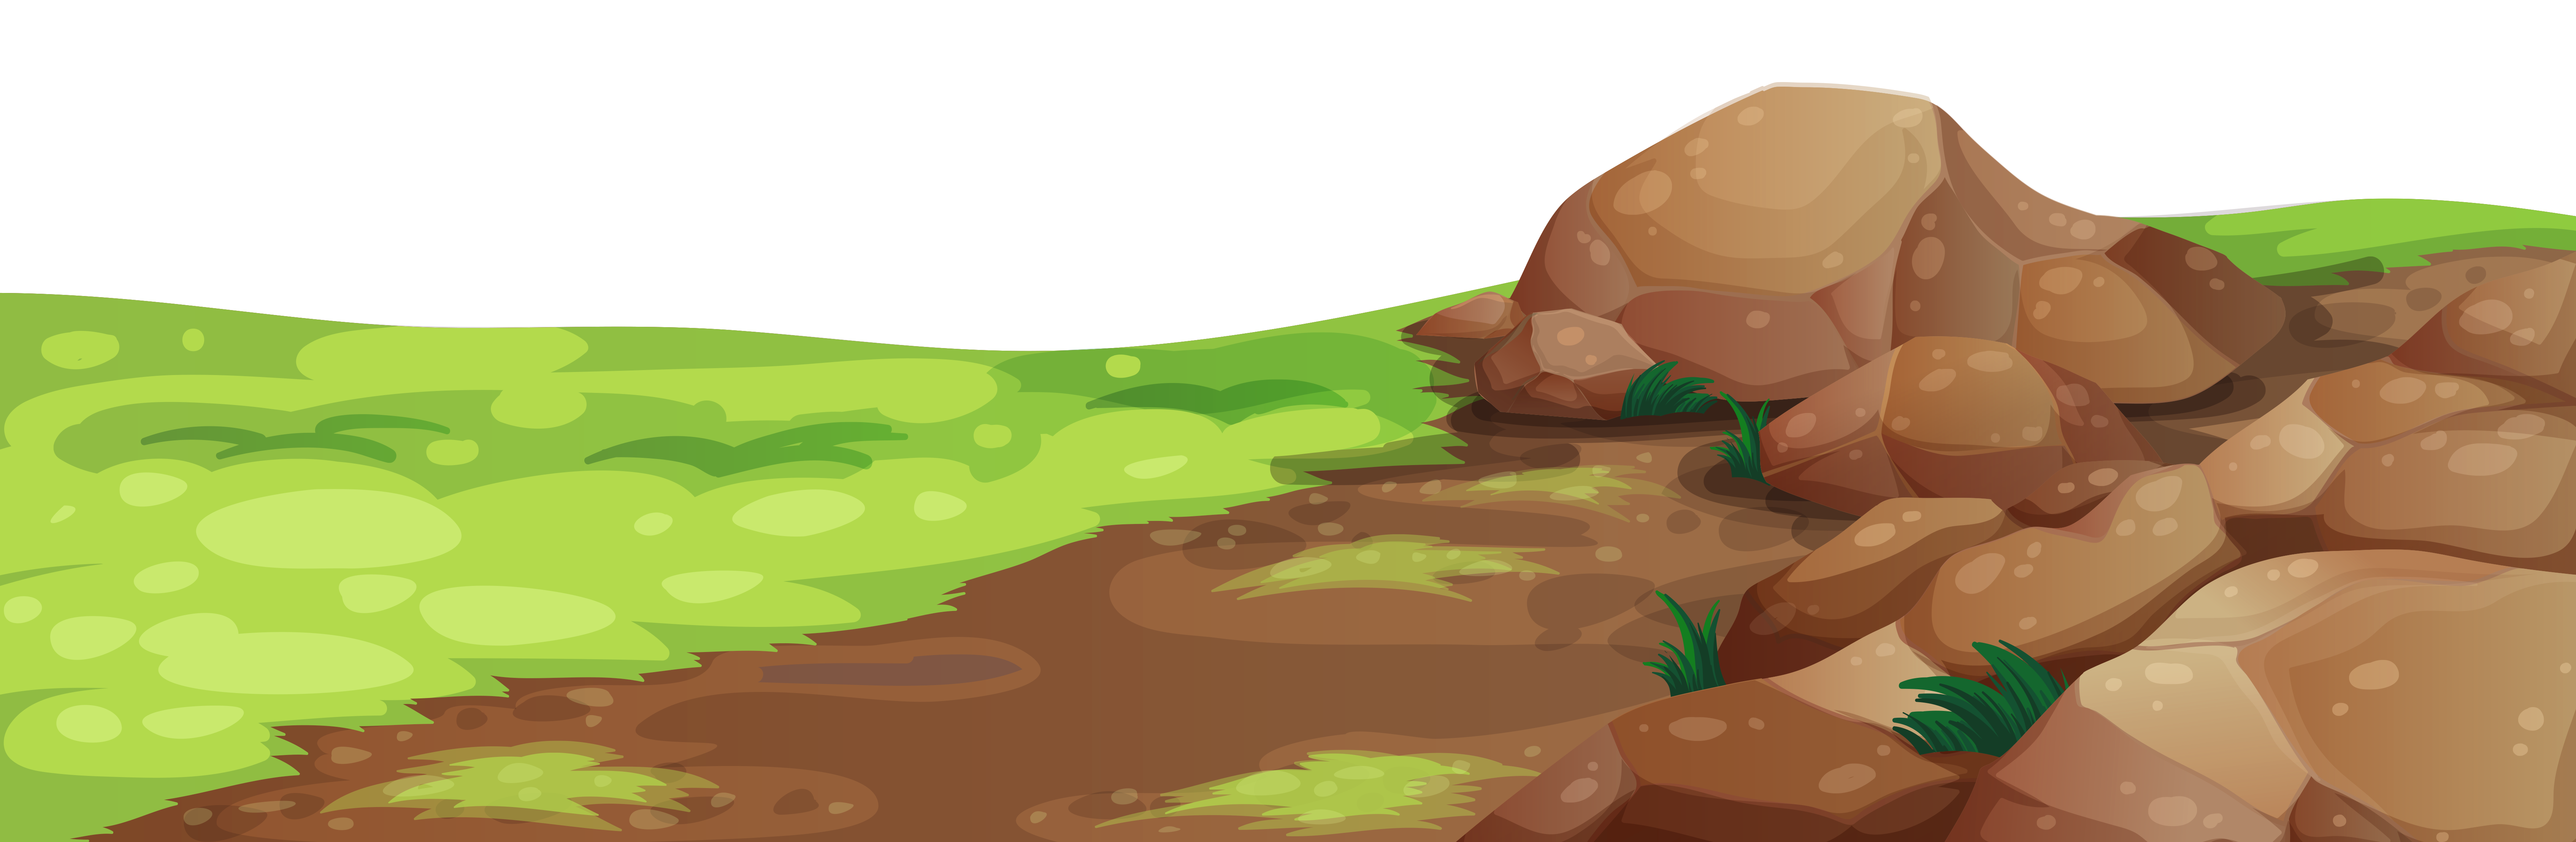 Grass and stones png. Mountain clipart ground